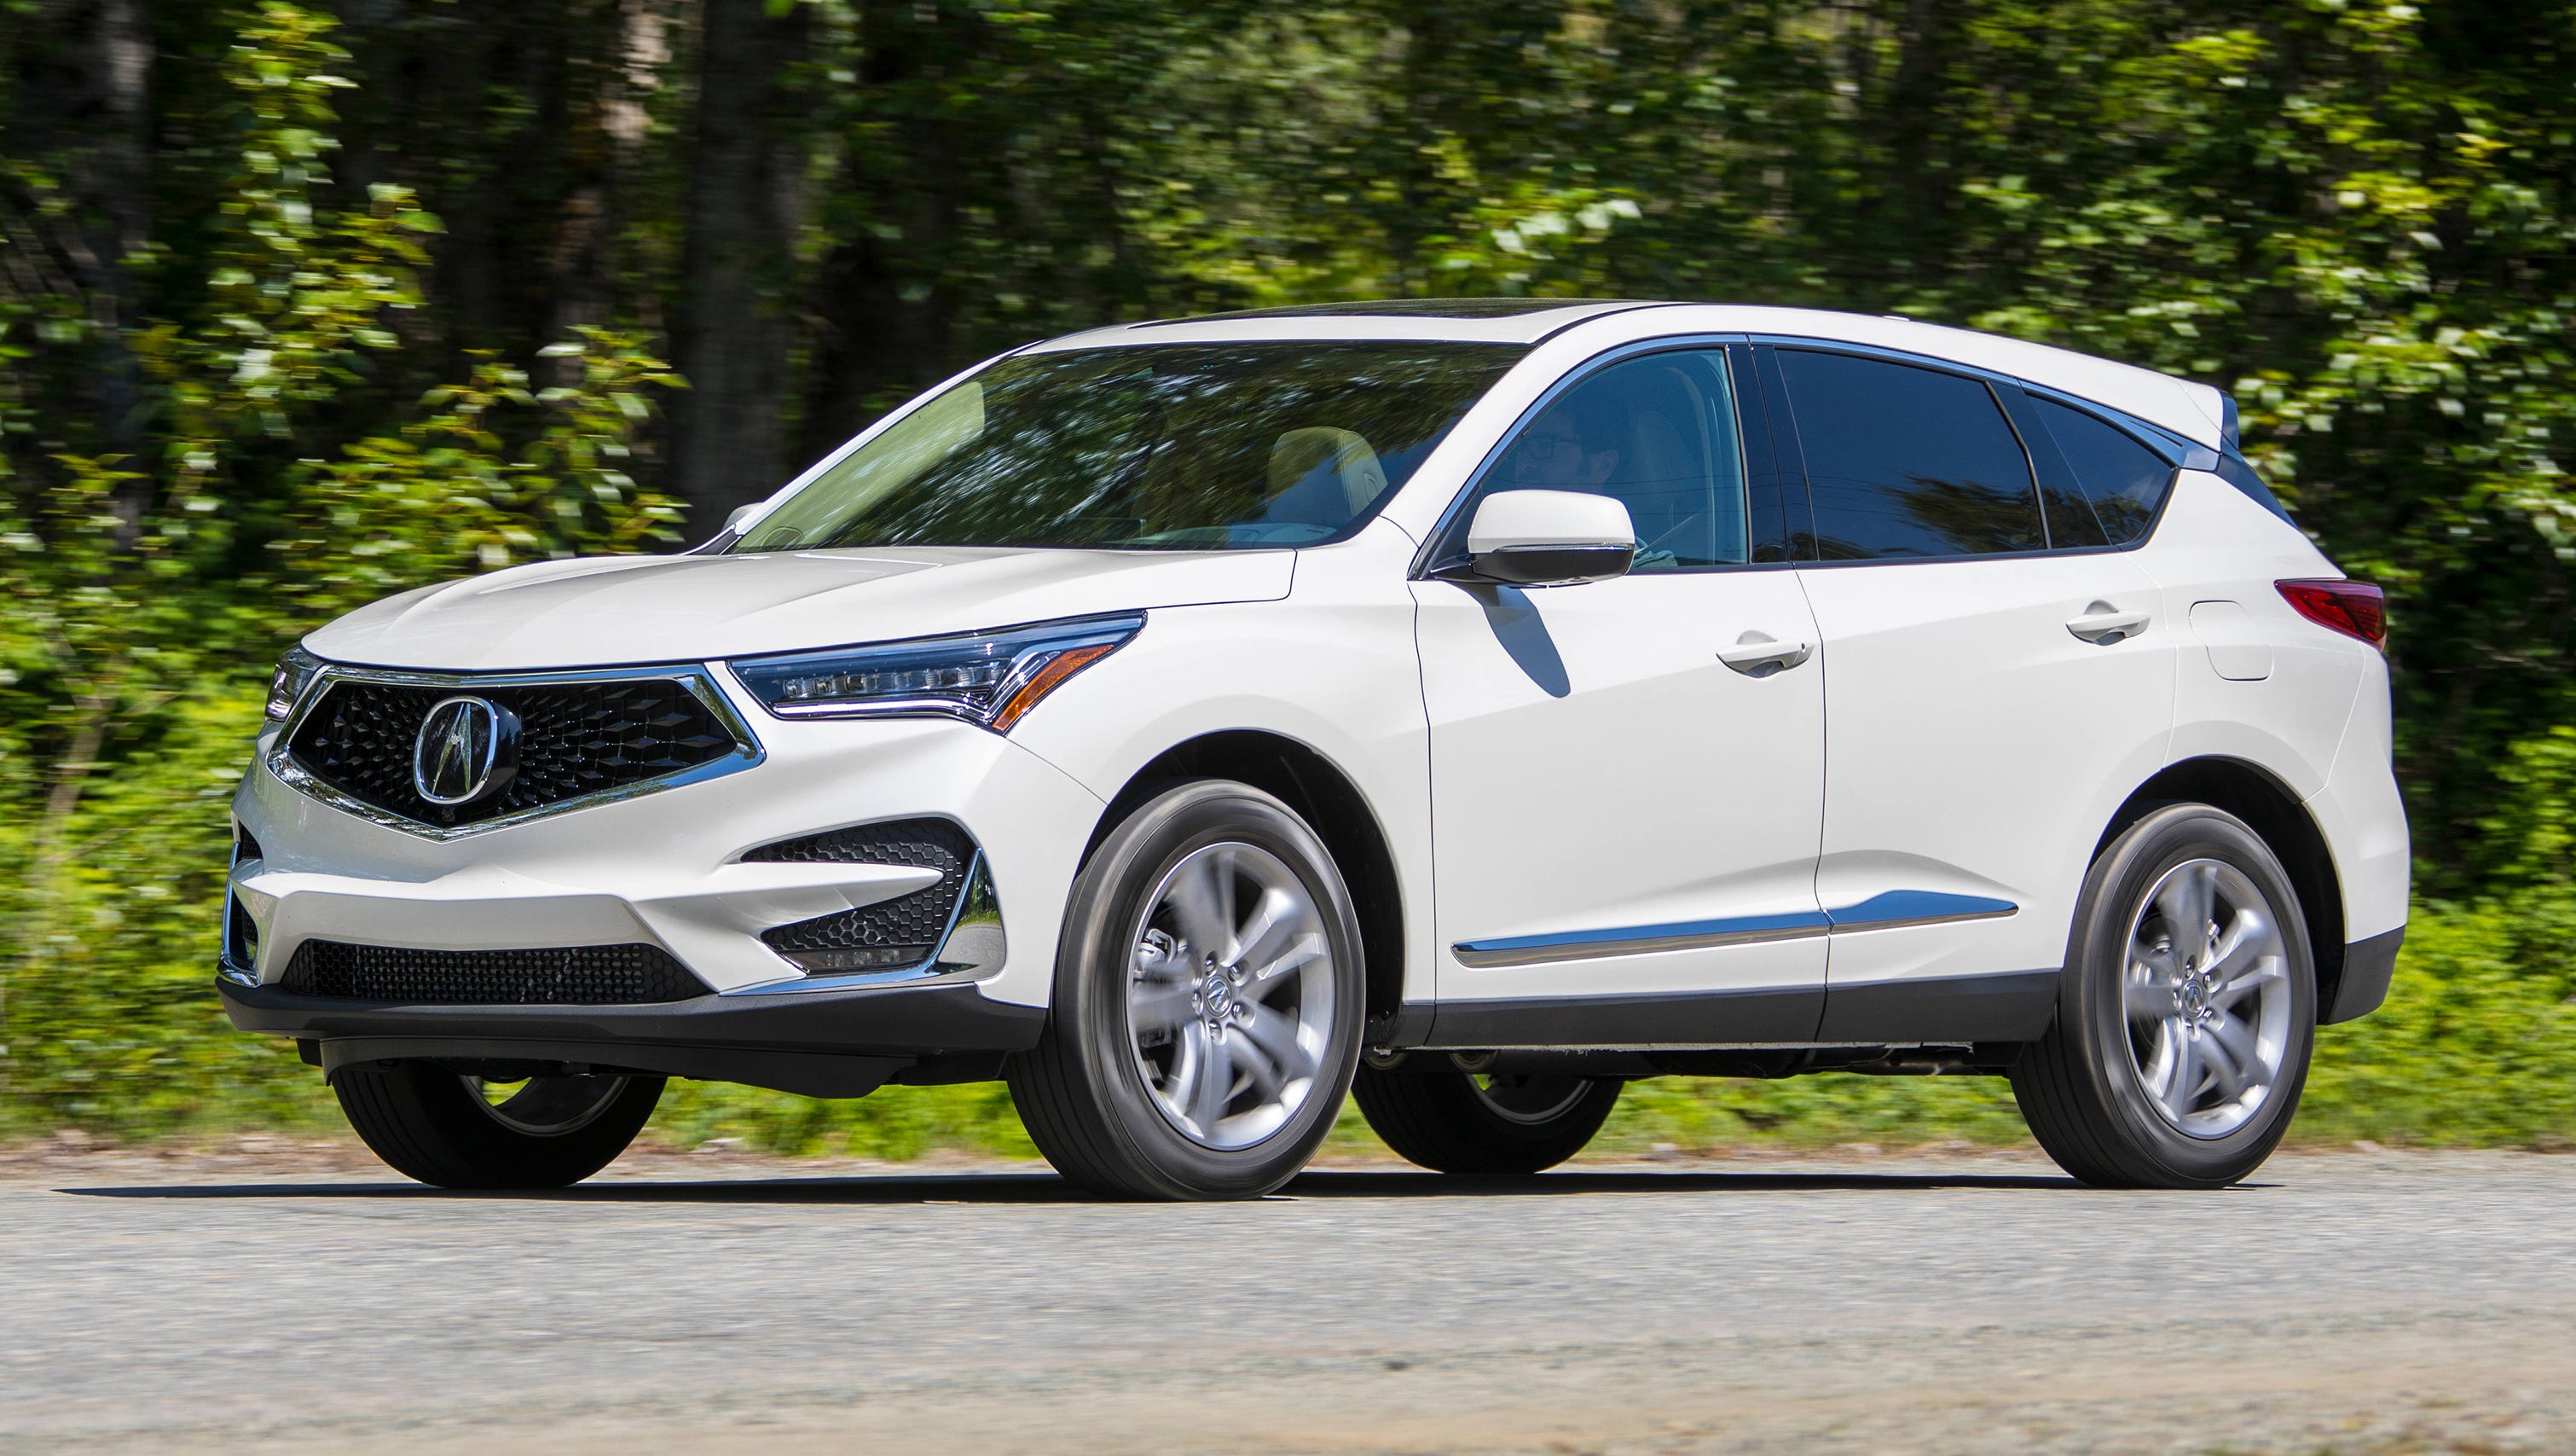 2019 Acura RDX review: Price, power drive SUV forward